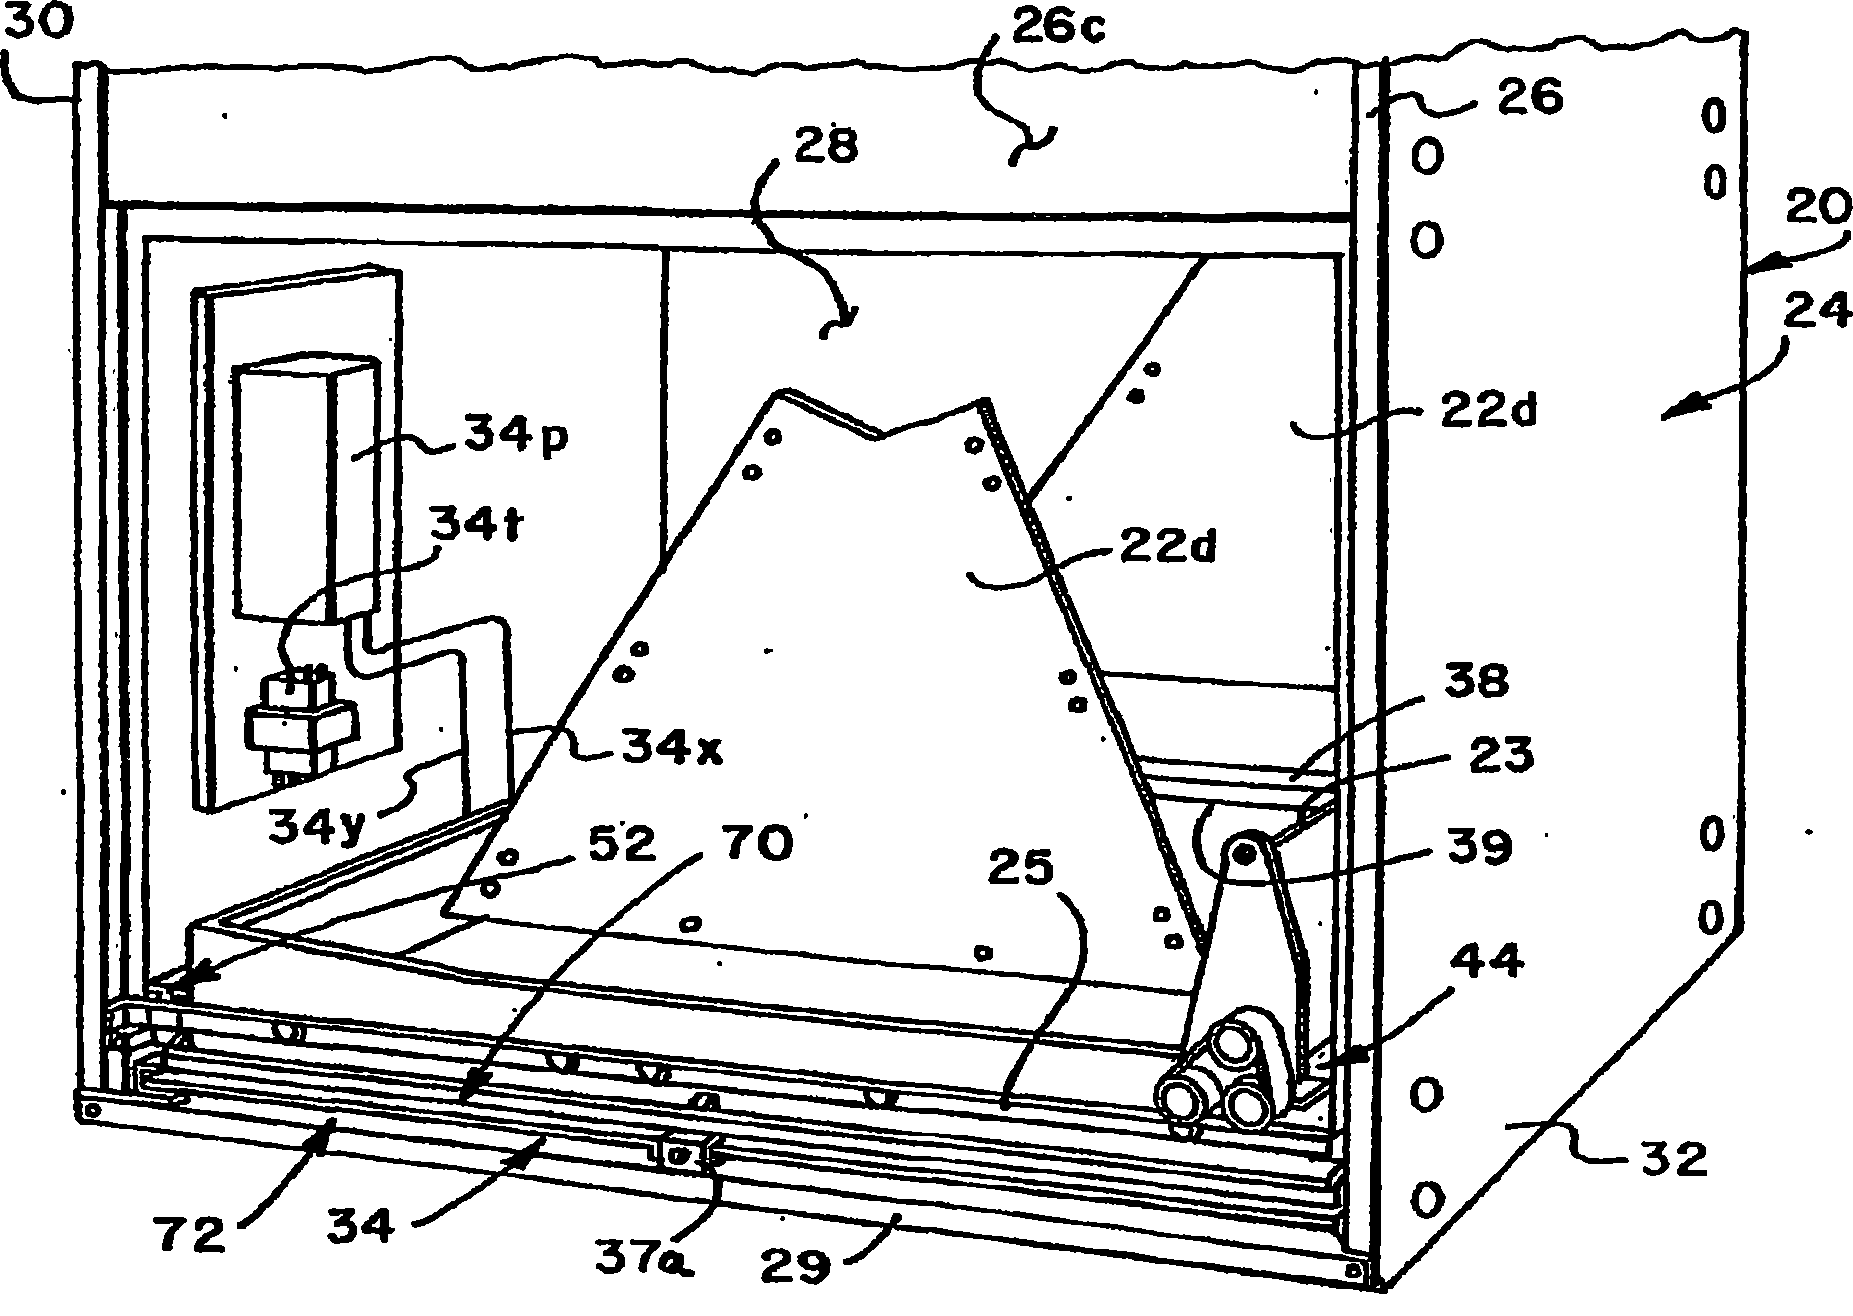 Air conditioning apparatus with integrated air filtration system